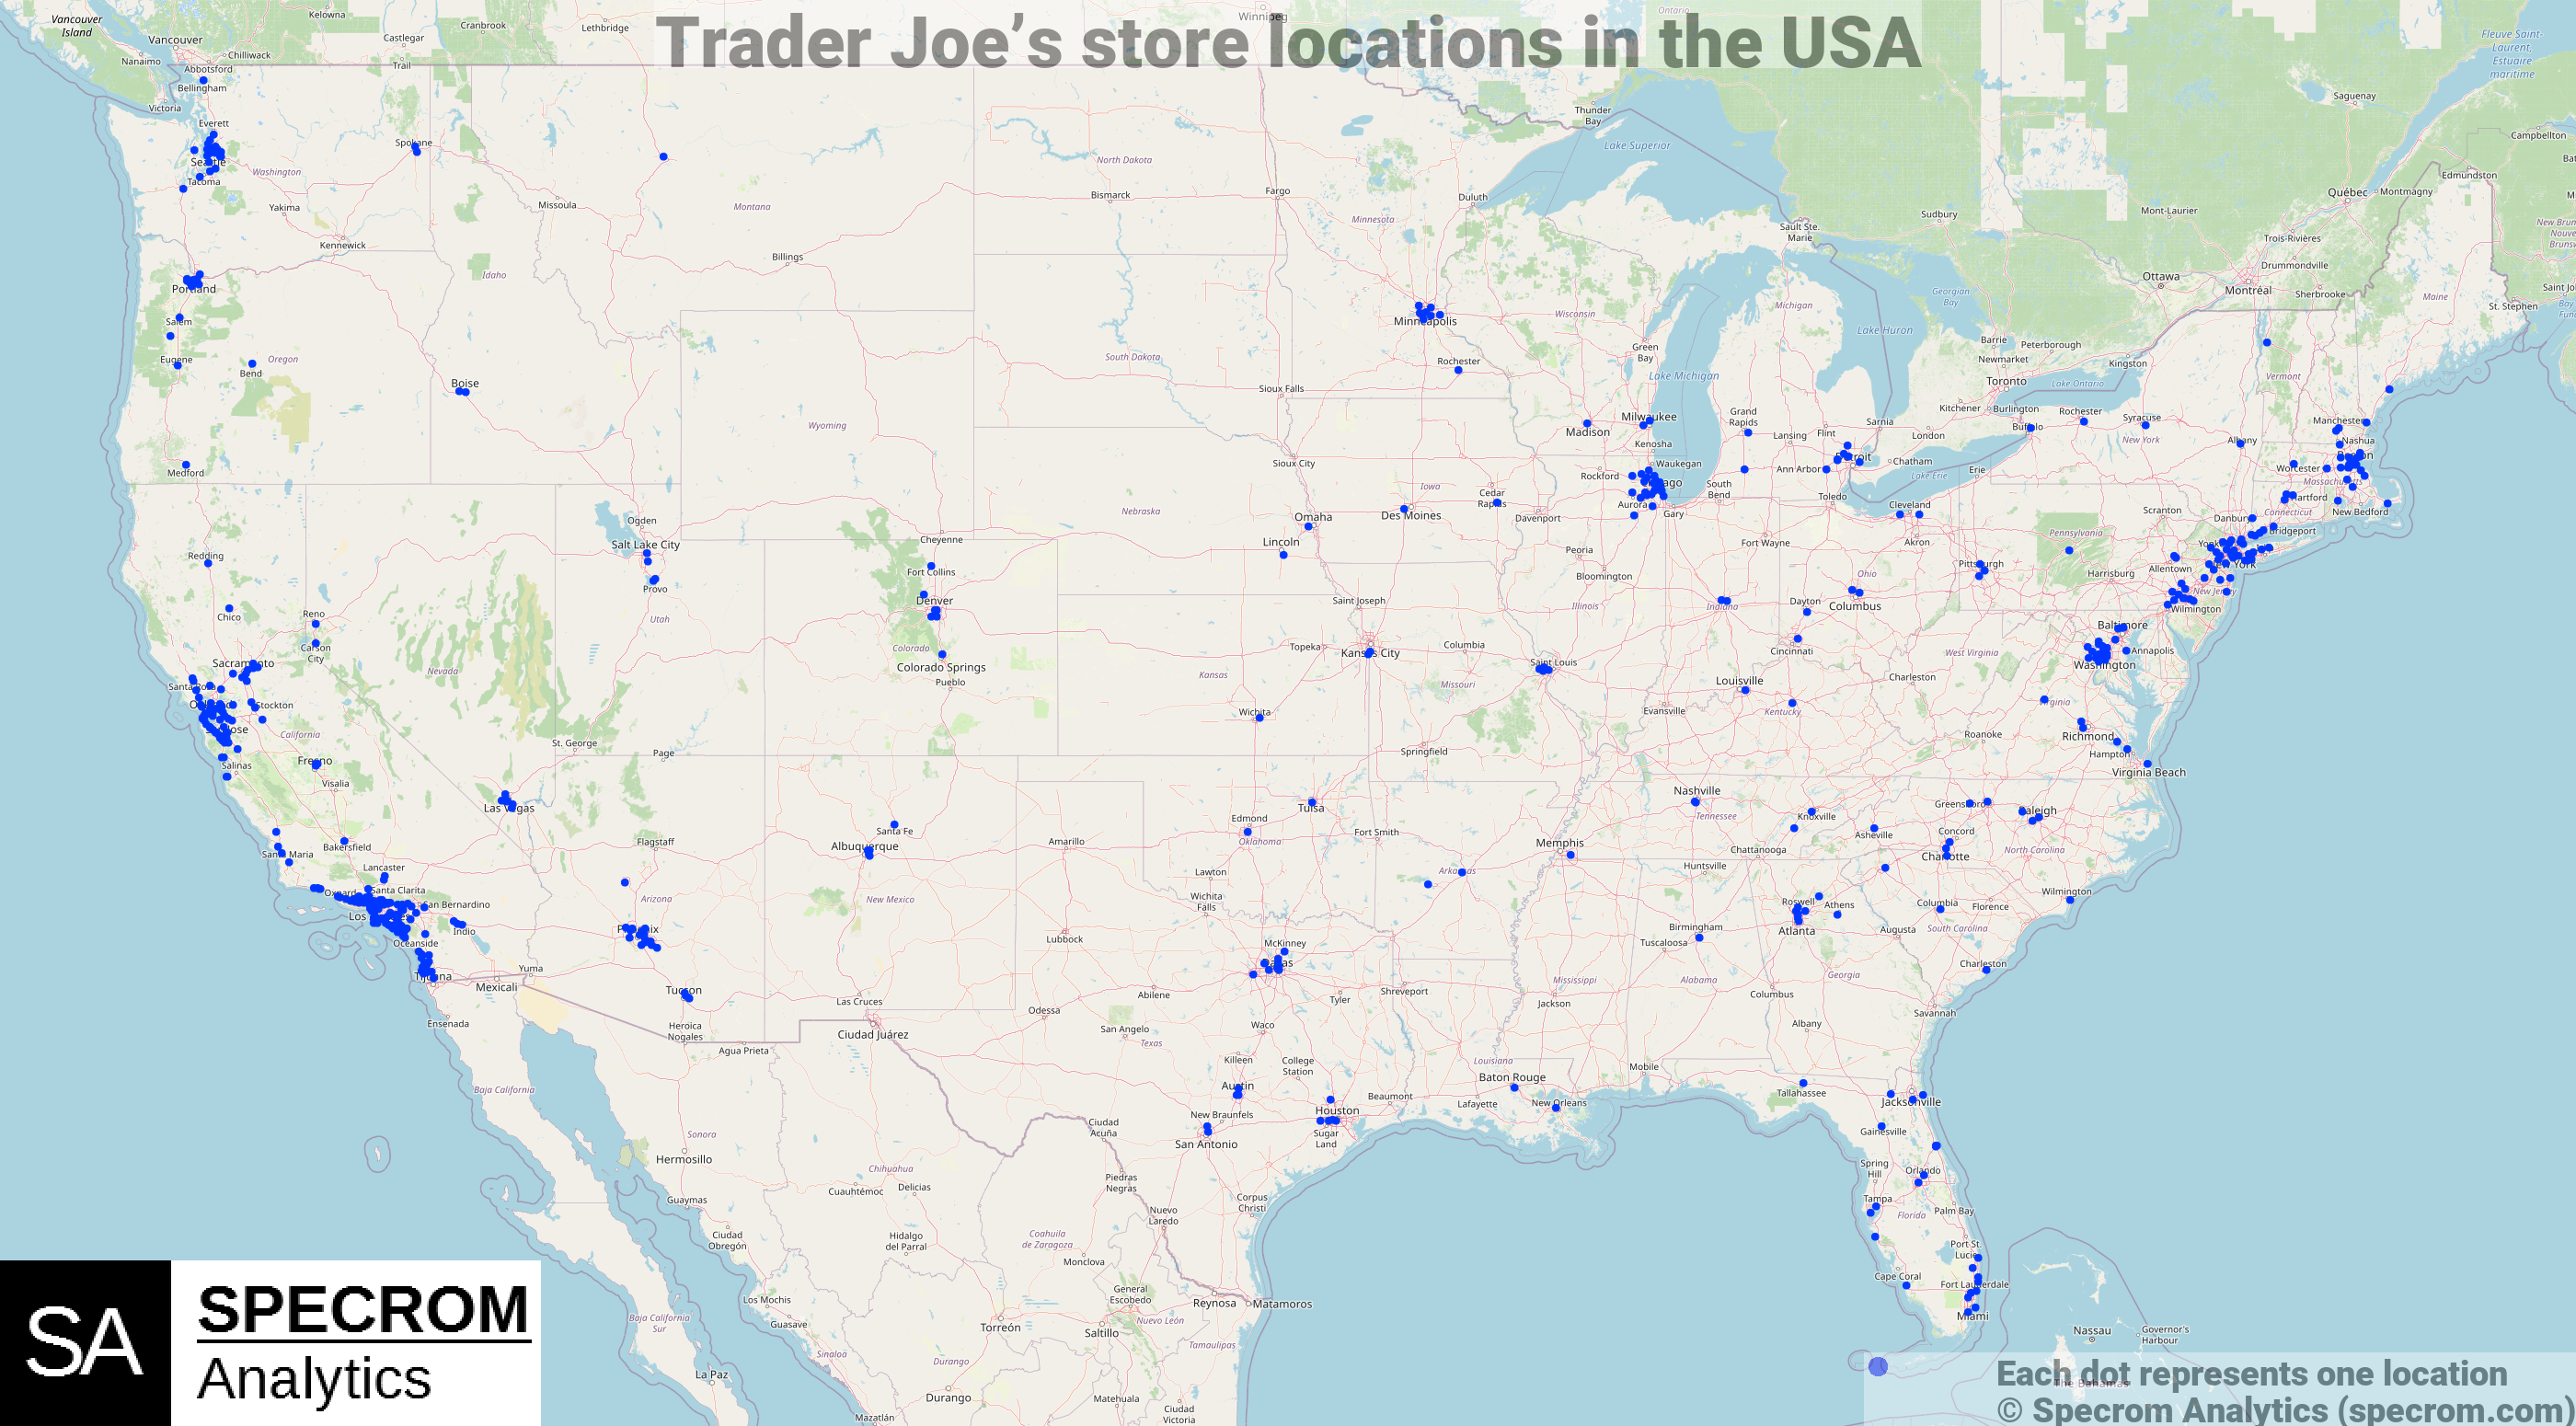 Trader Joe's store locations in the USA